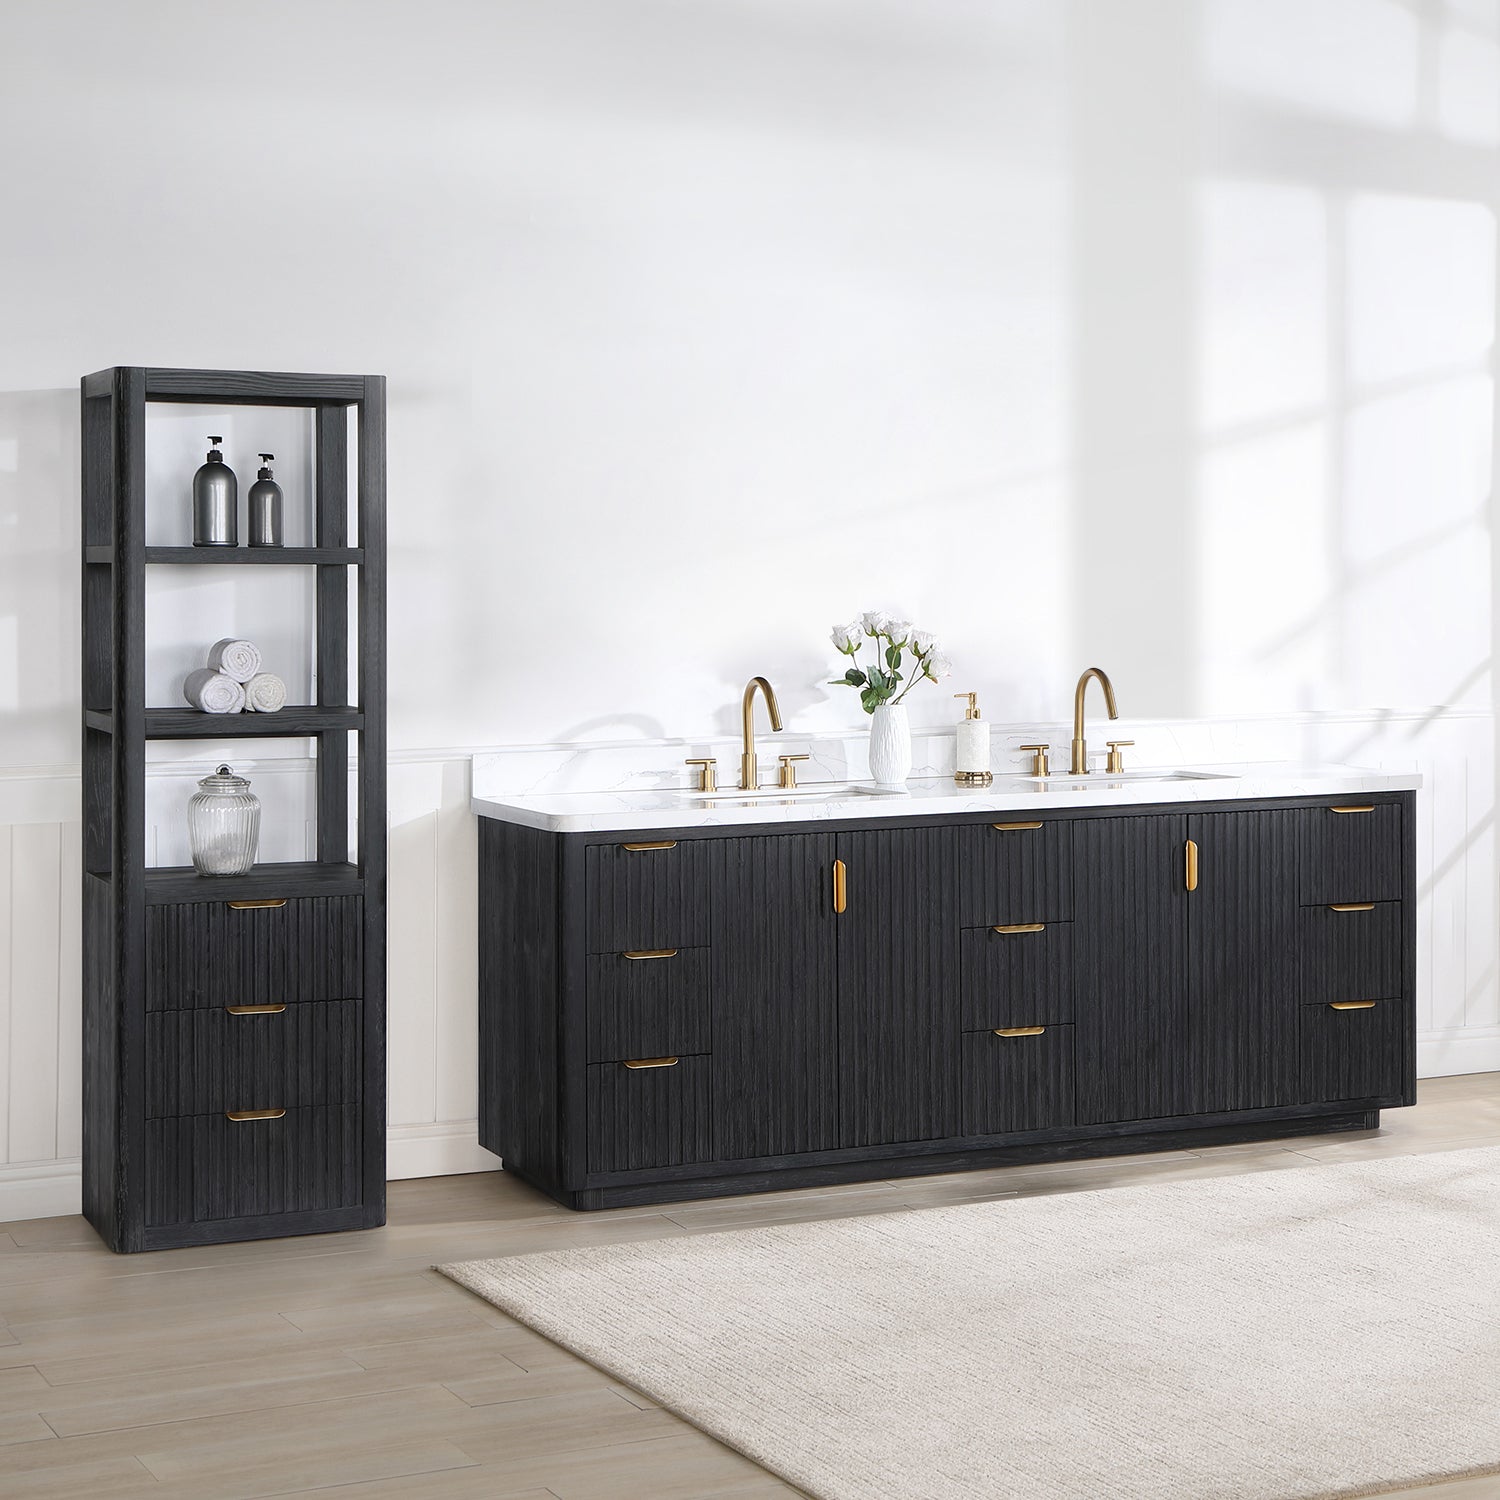 Cádiz 84in. Free-standing Double Bathroom Vanity in Fir Wood Black with Composite top in Lightning White